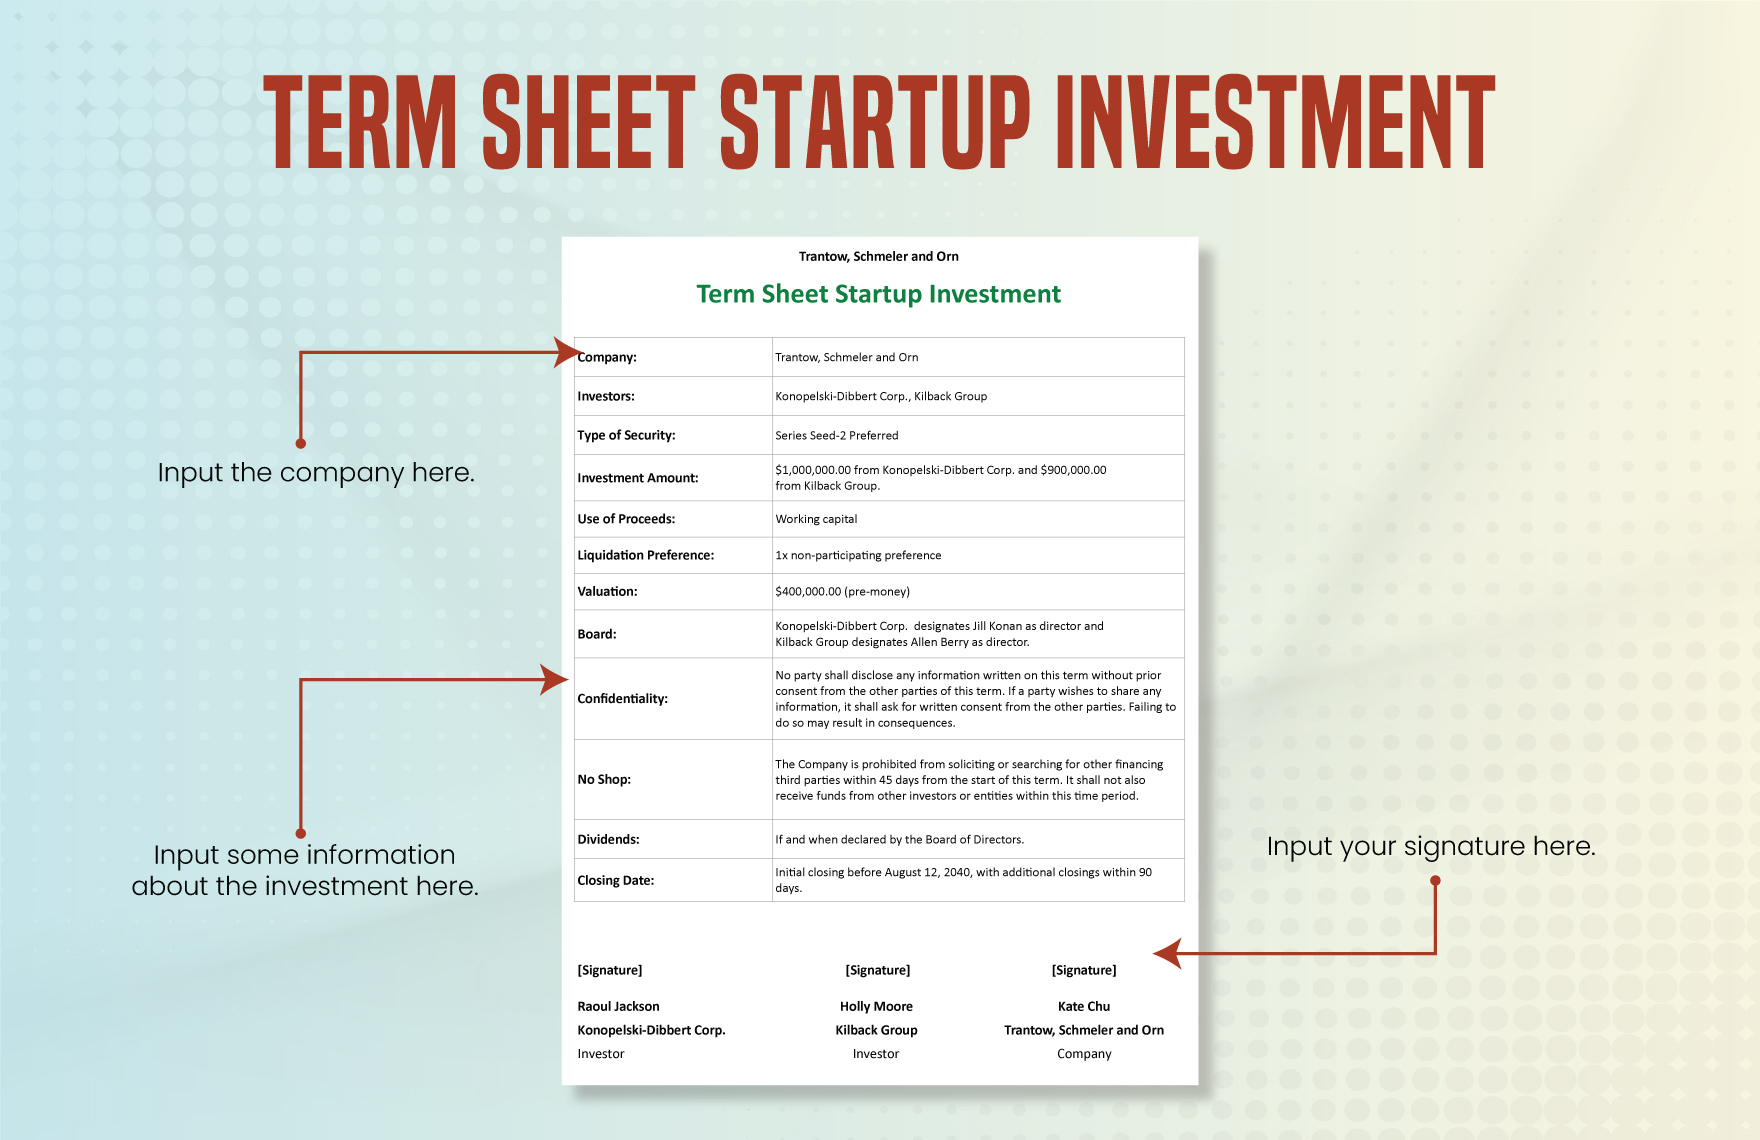 Term Sheet Startup Investment Template